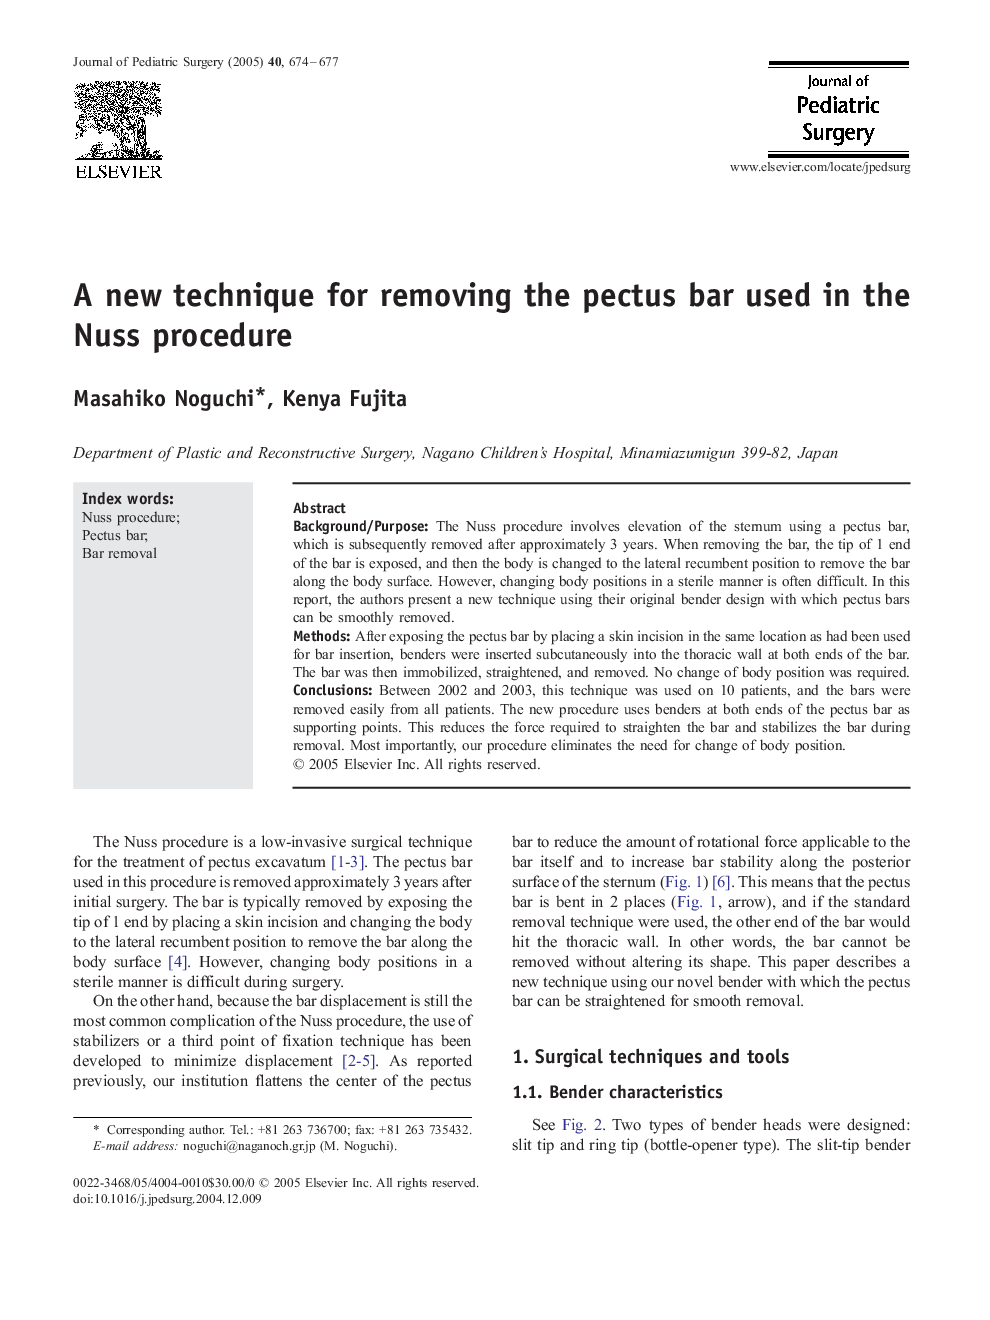 A new technique for removing the pectus bar used in the Nuss procedure